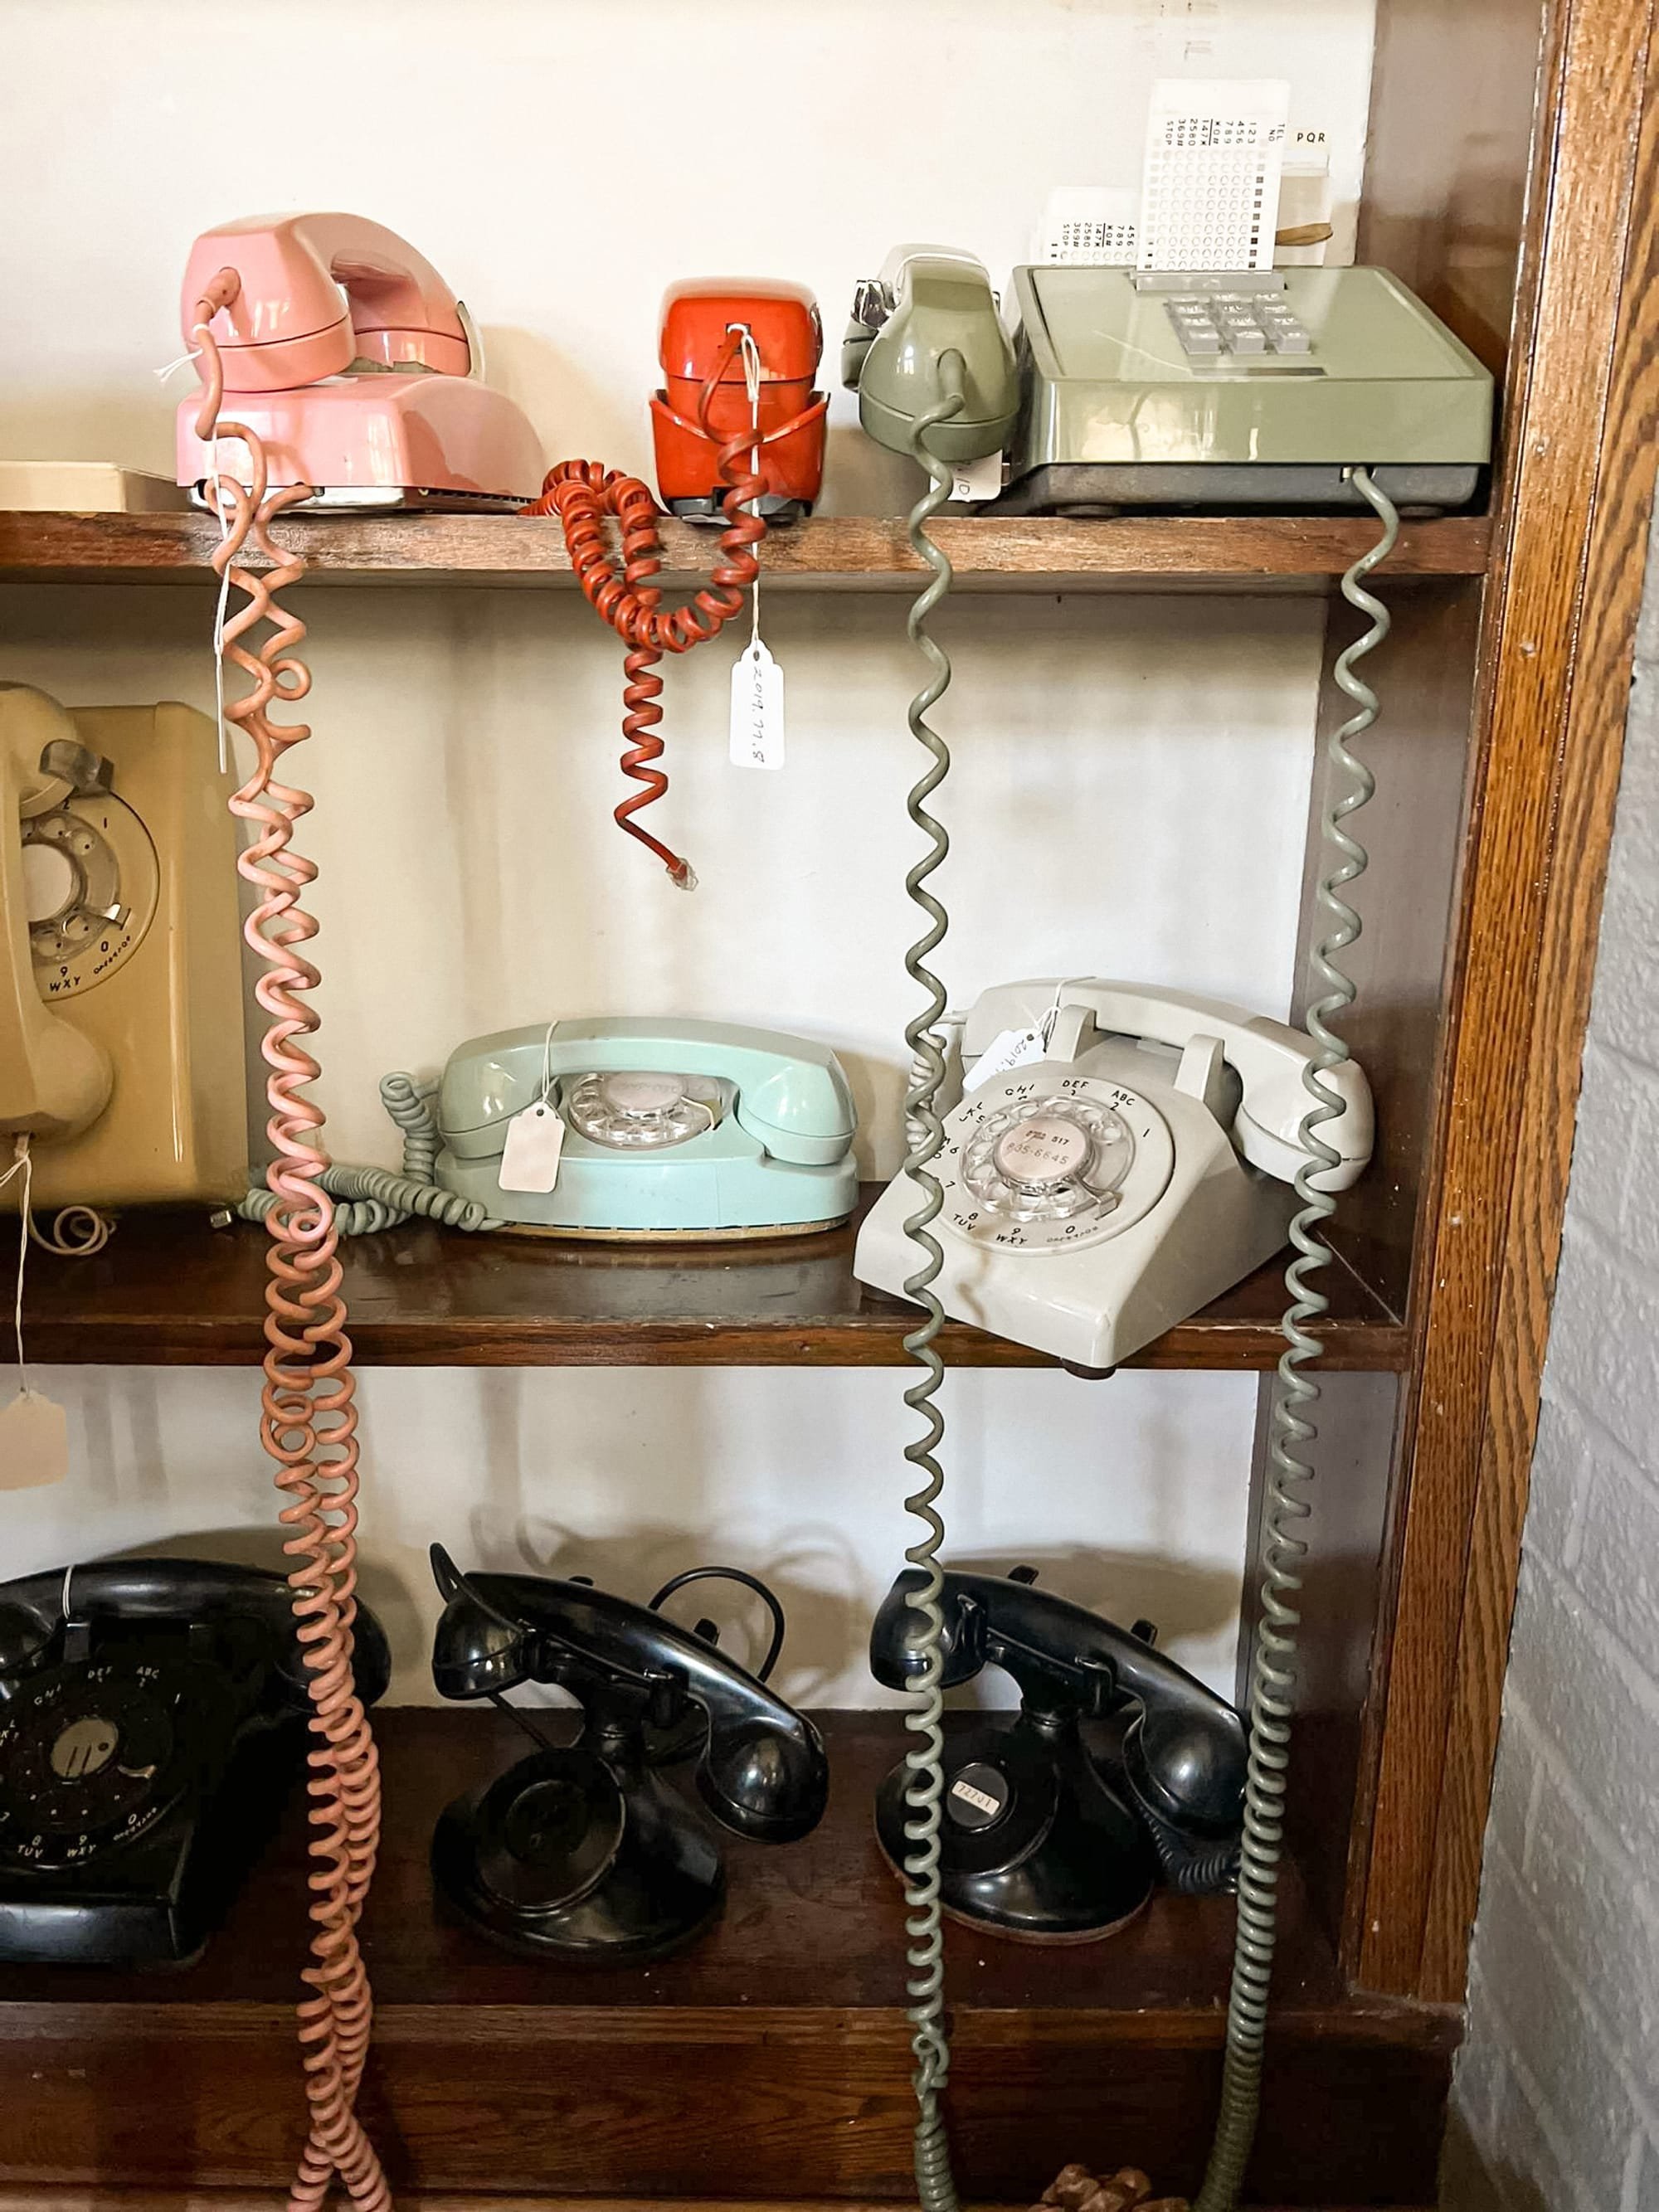 Telephones from the 1970's.